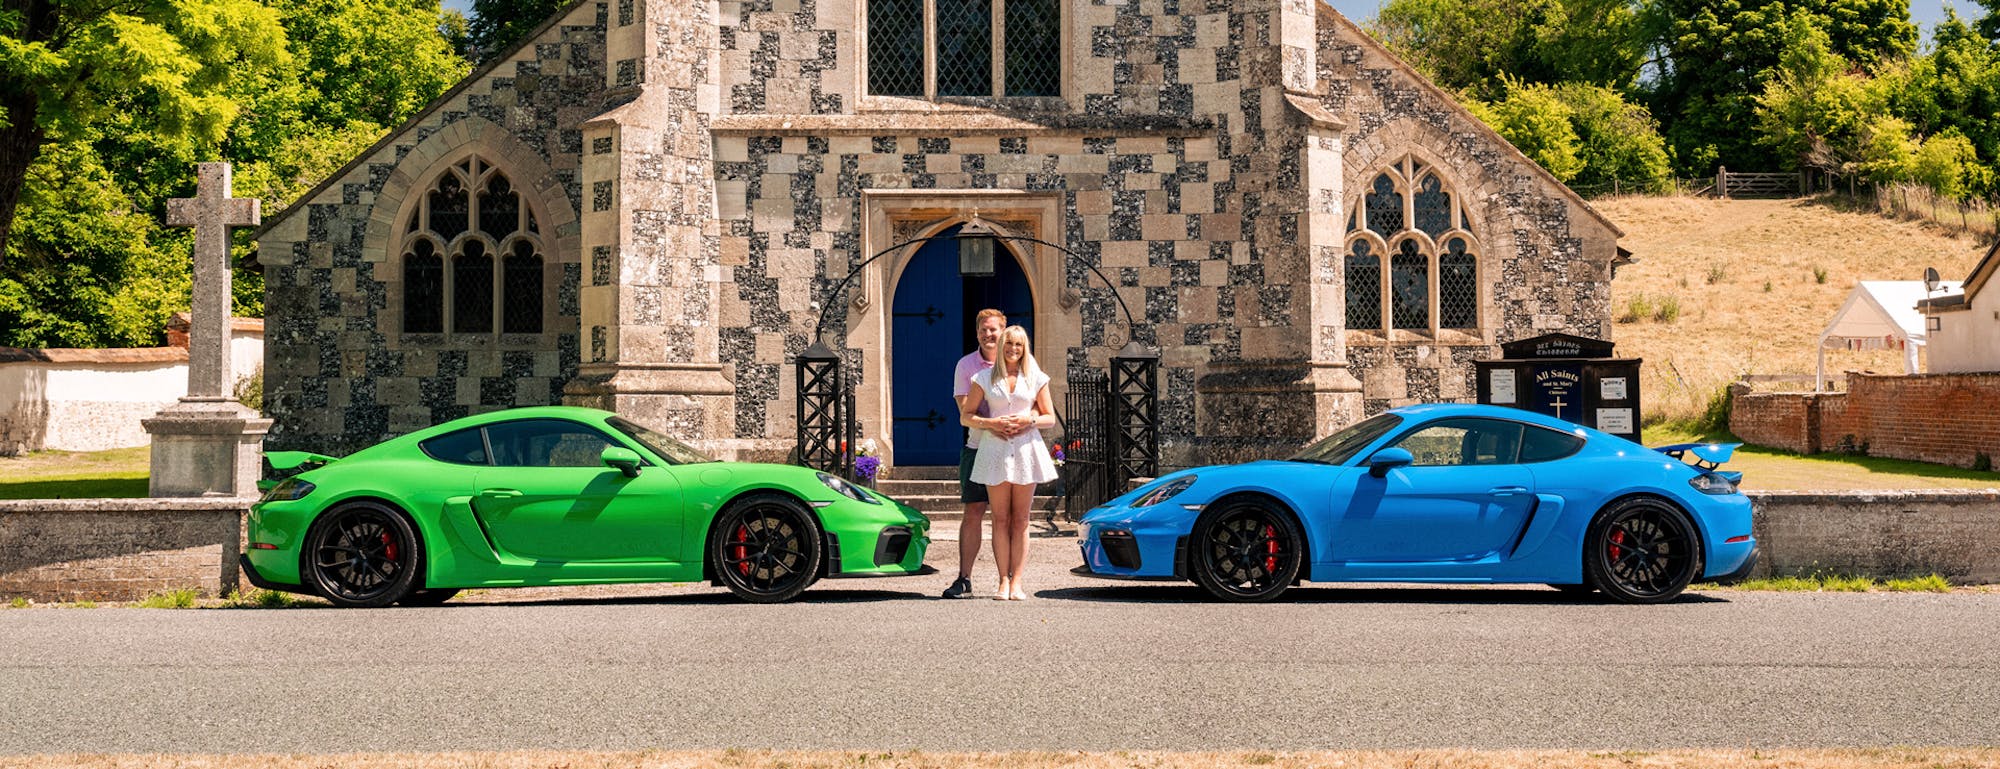 Green and blue 718 Cayman GT4, couple standing in between